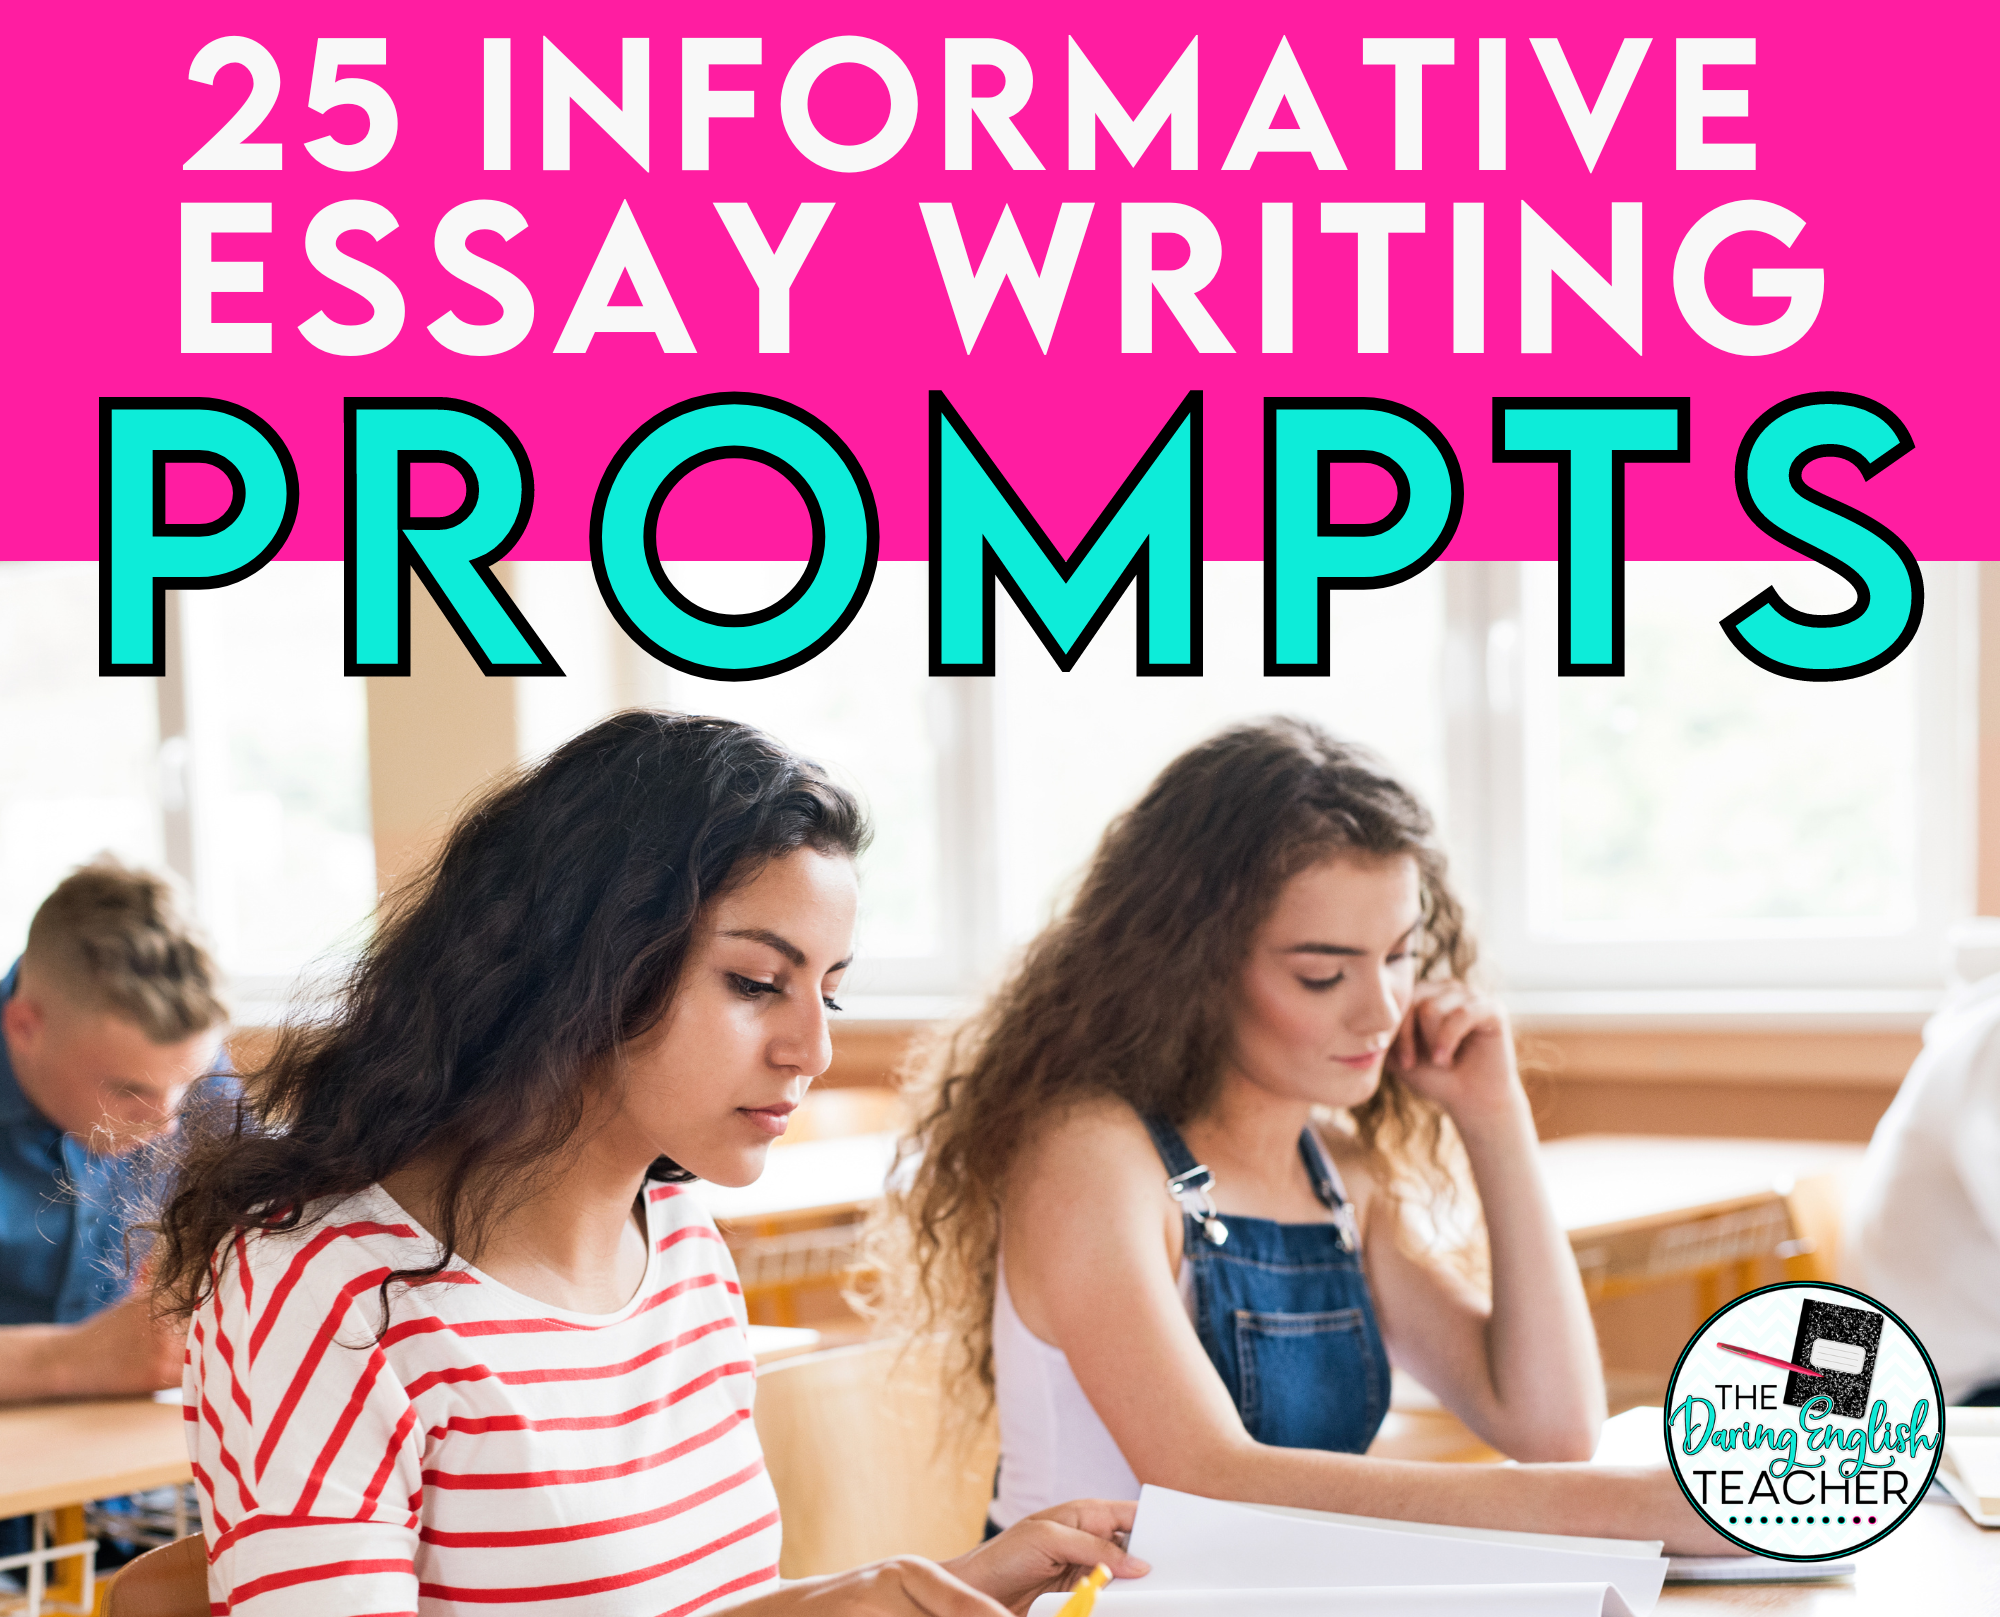 25 Informative Essay Writing Prompts for the Secondary ELA Classroom